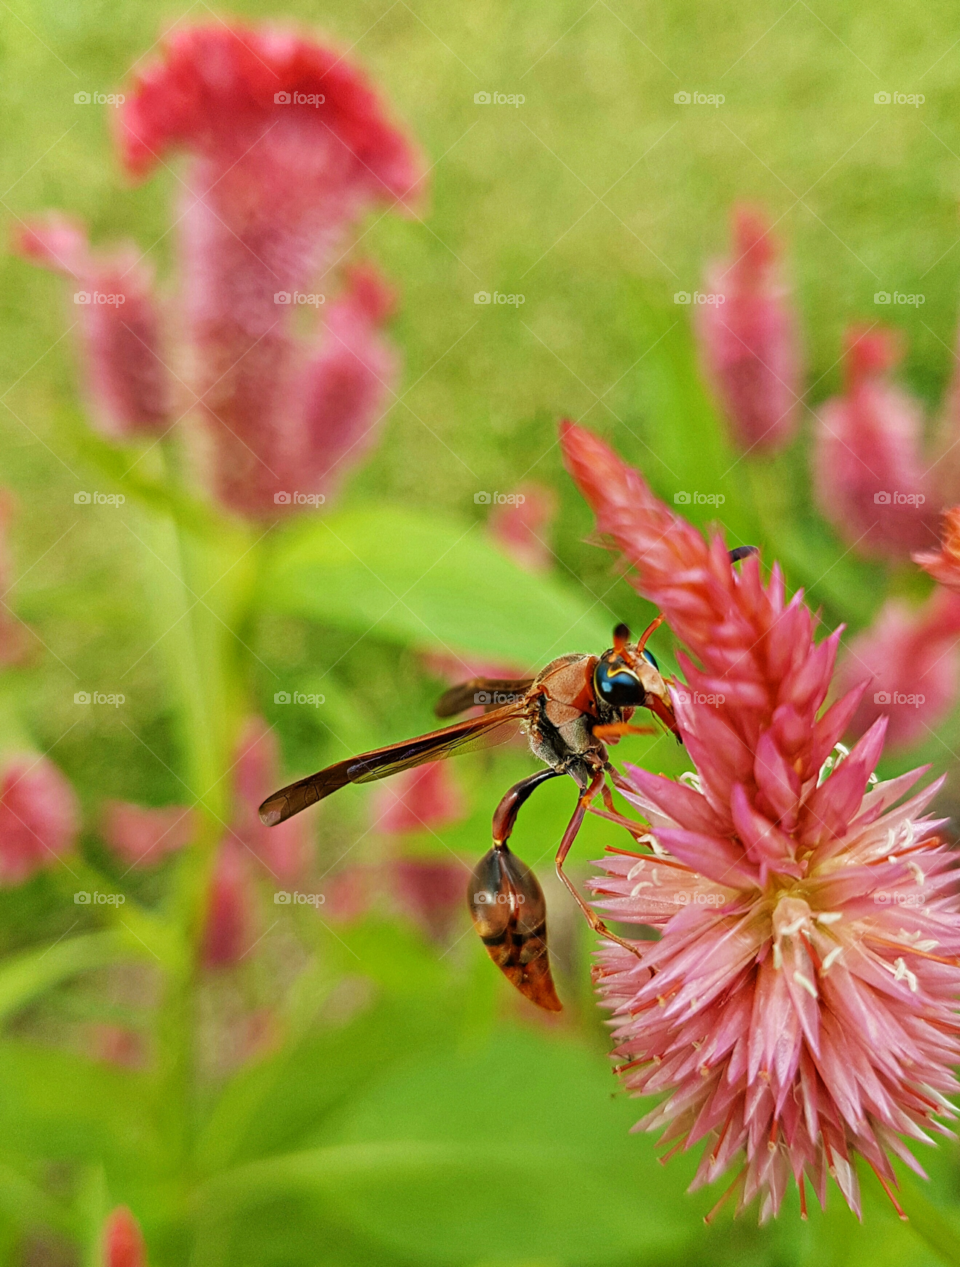 Insect on pink flower